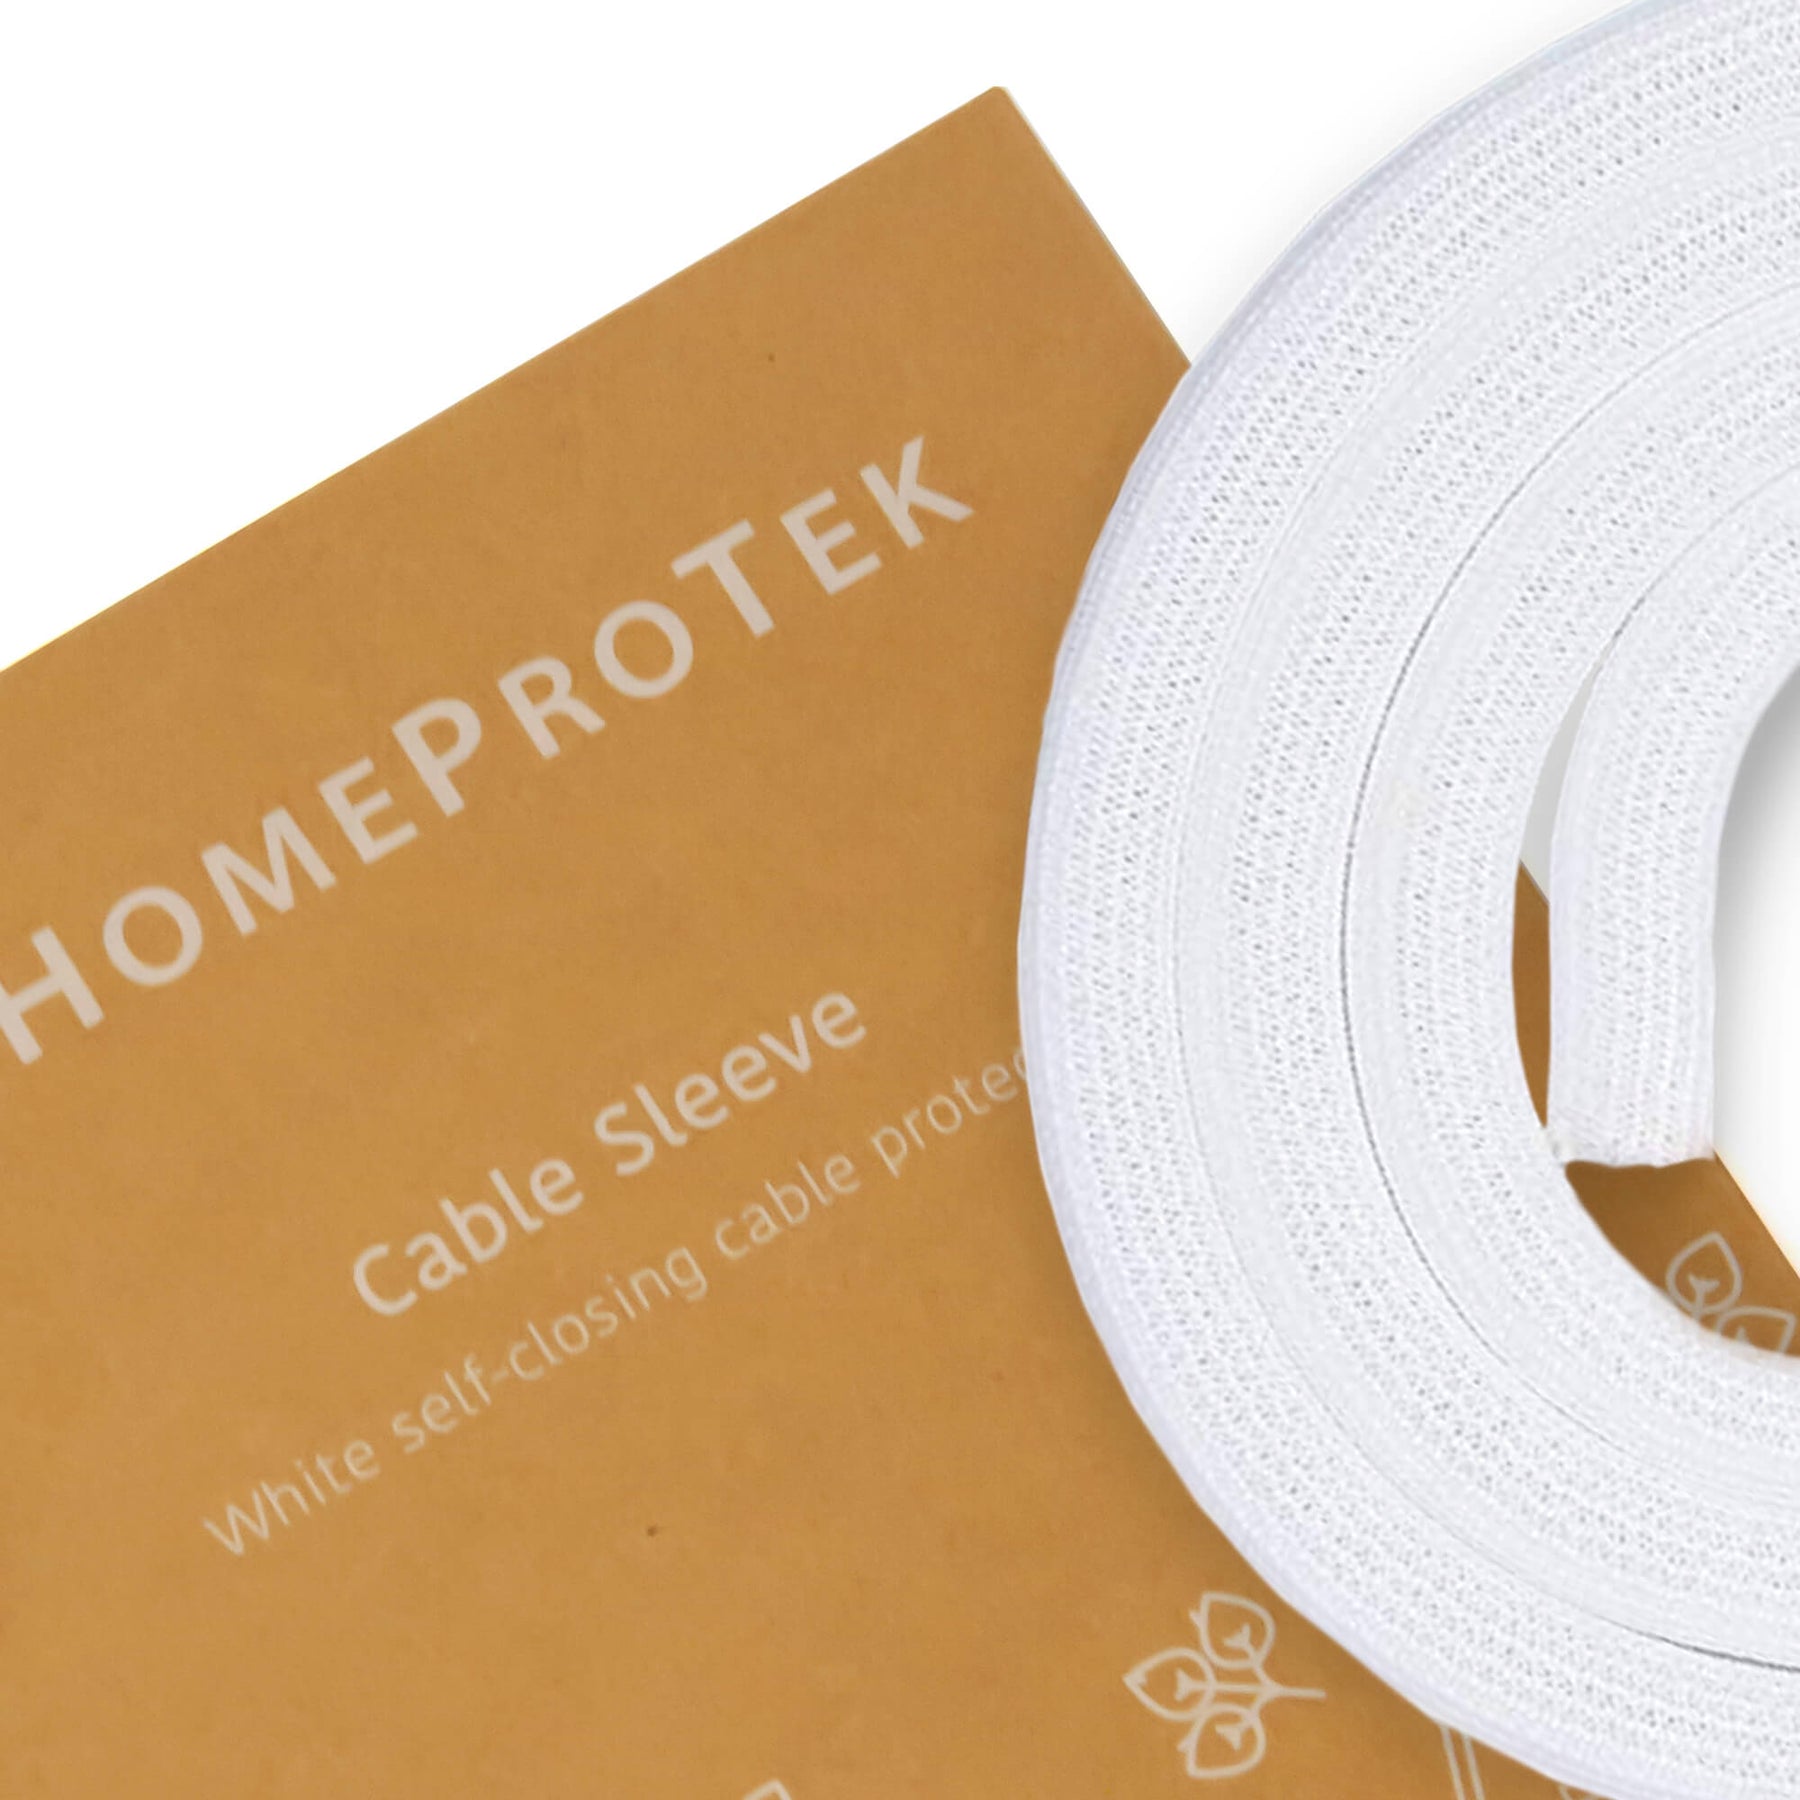 Cable conduit / Flexible cable cover – Homeprotek